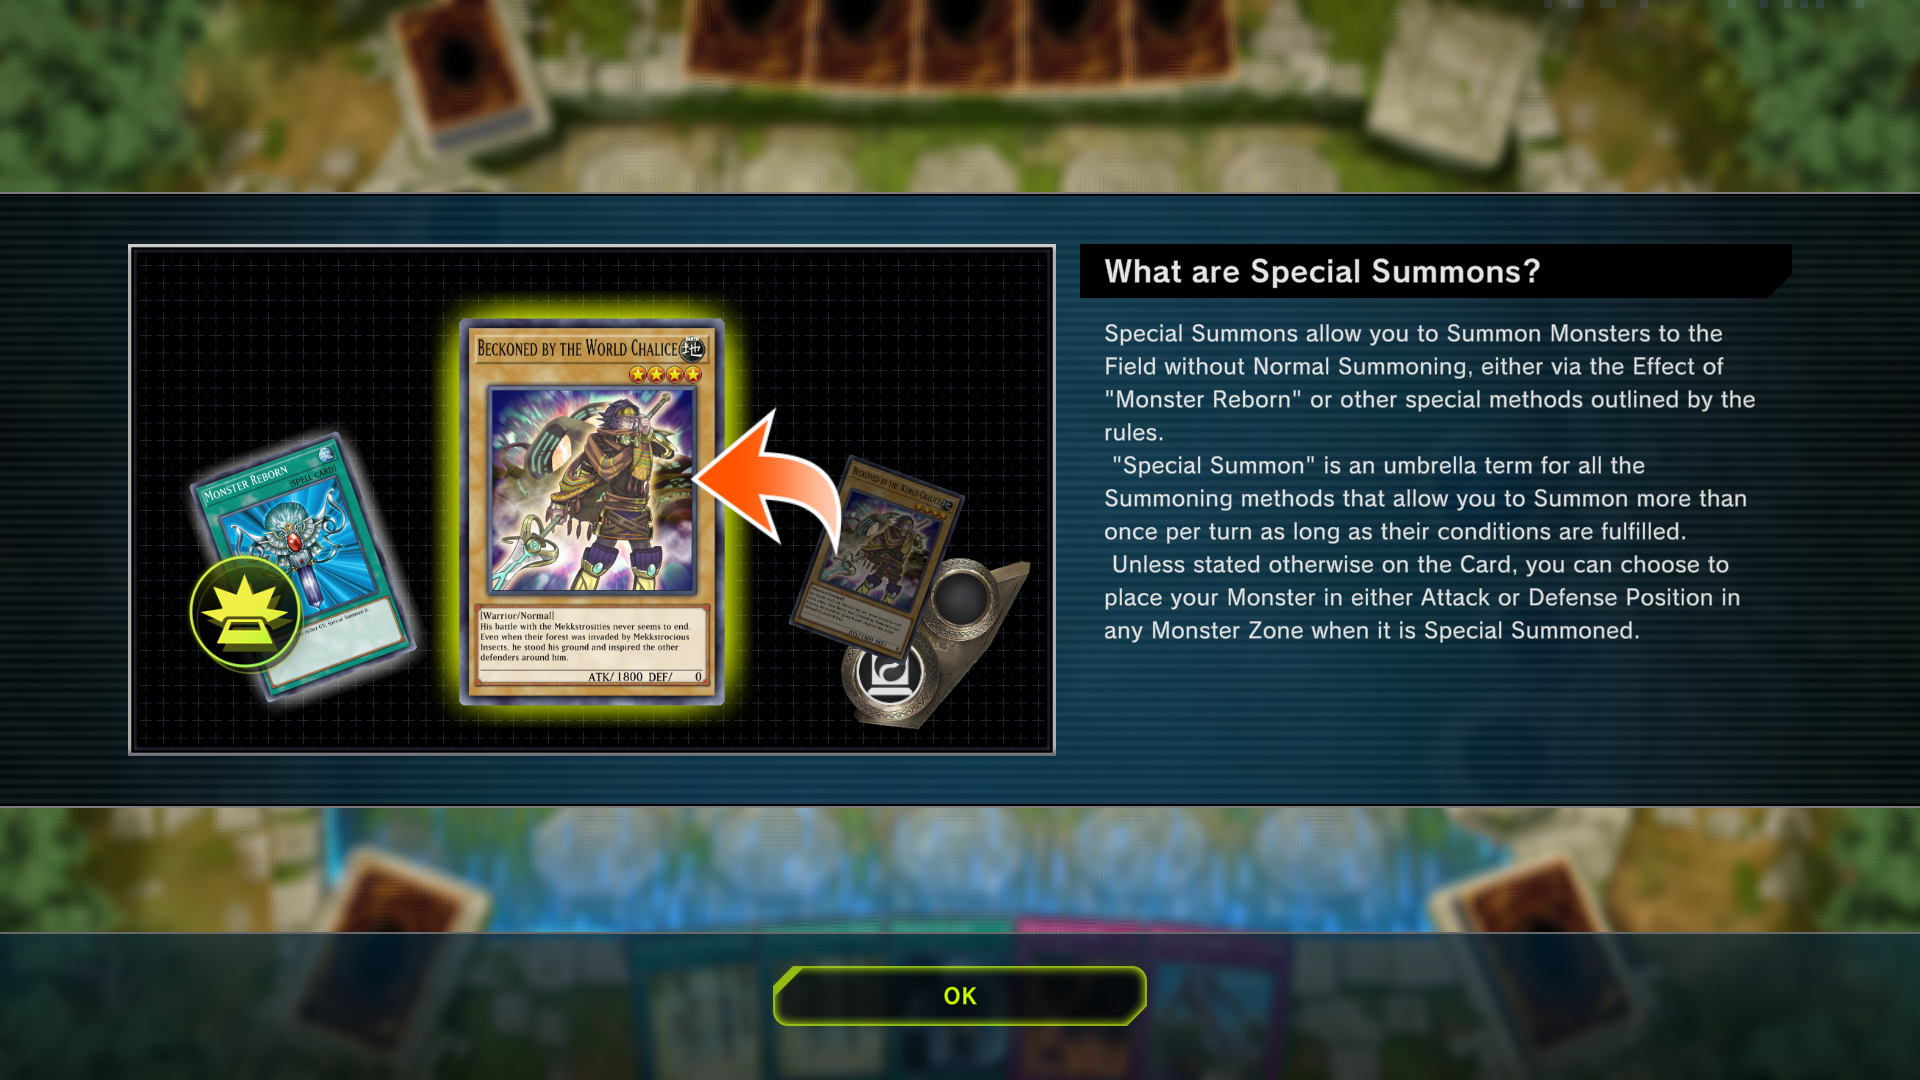 A tutorial for the game's Special Summoning mechanic